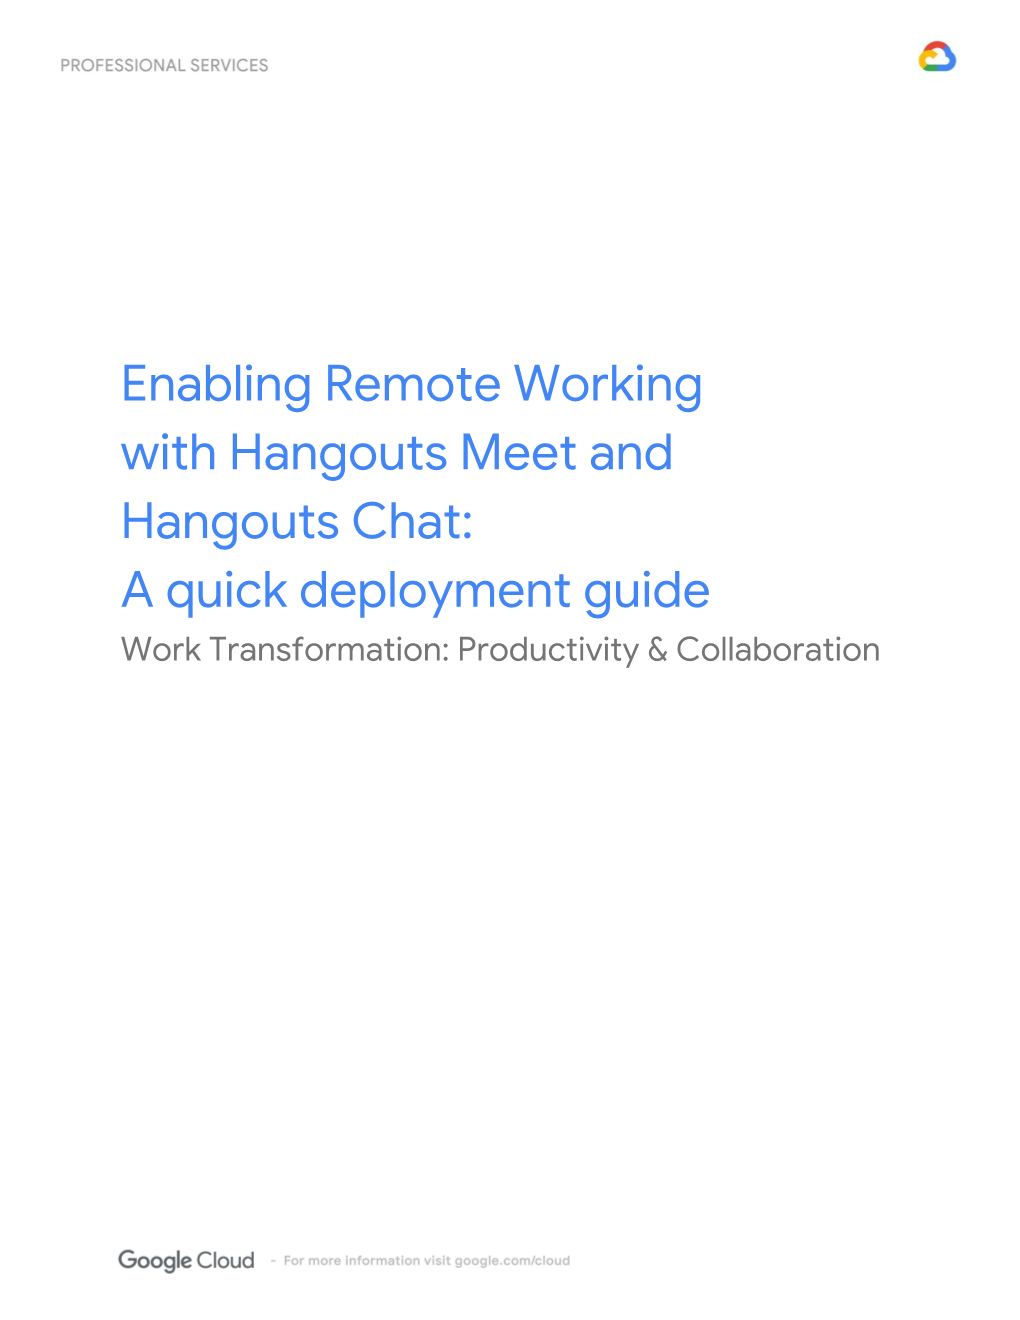 Quick Deployment Guide for Enabling Remote Working with Hangouts Meet